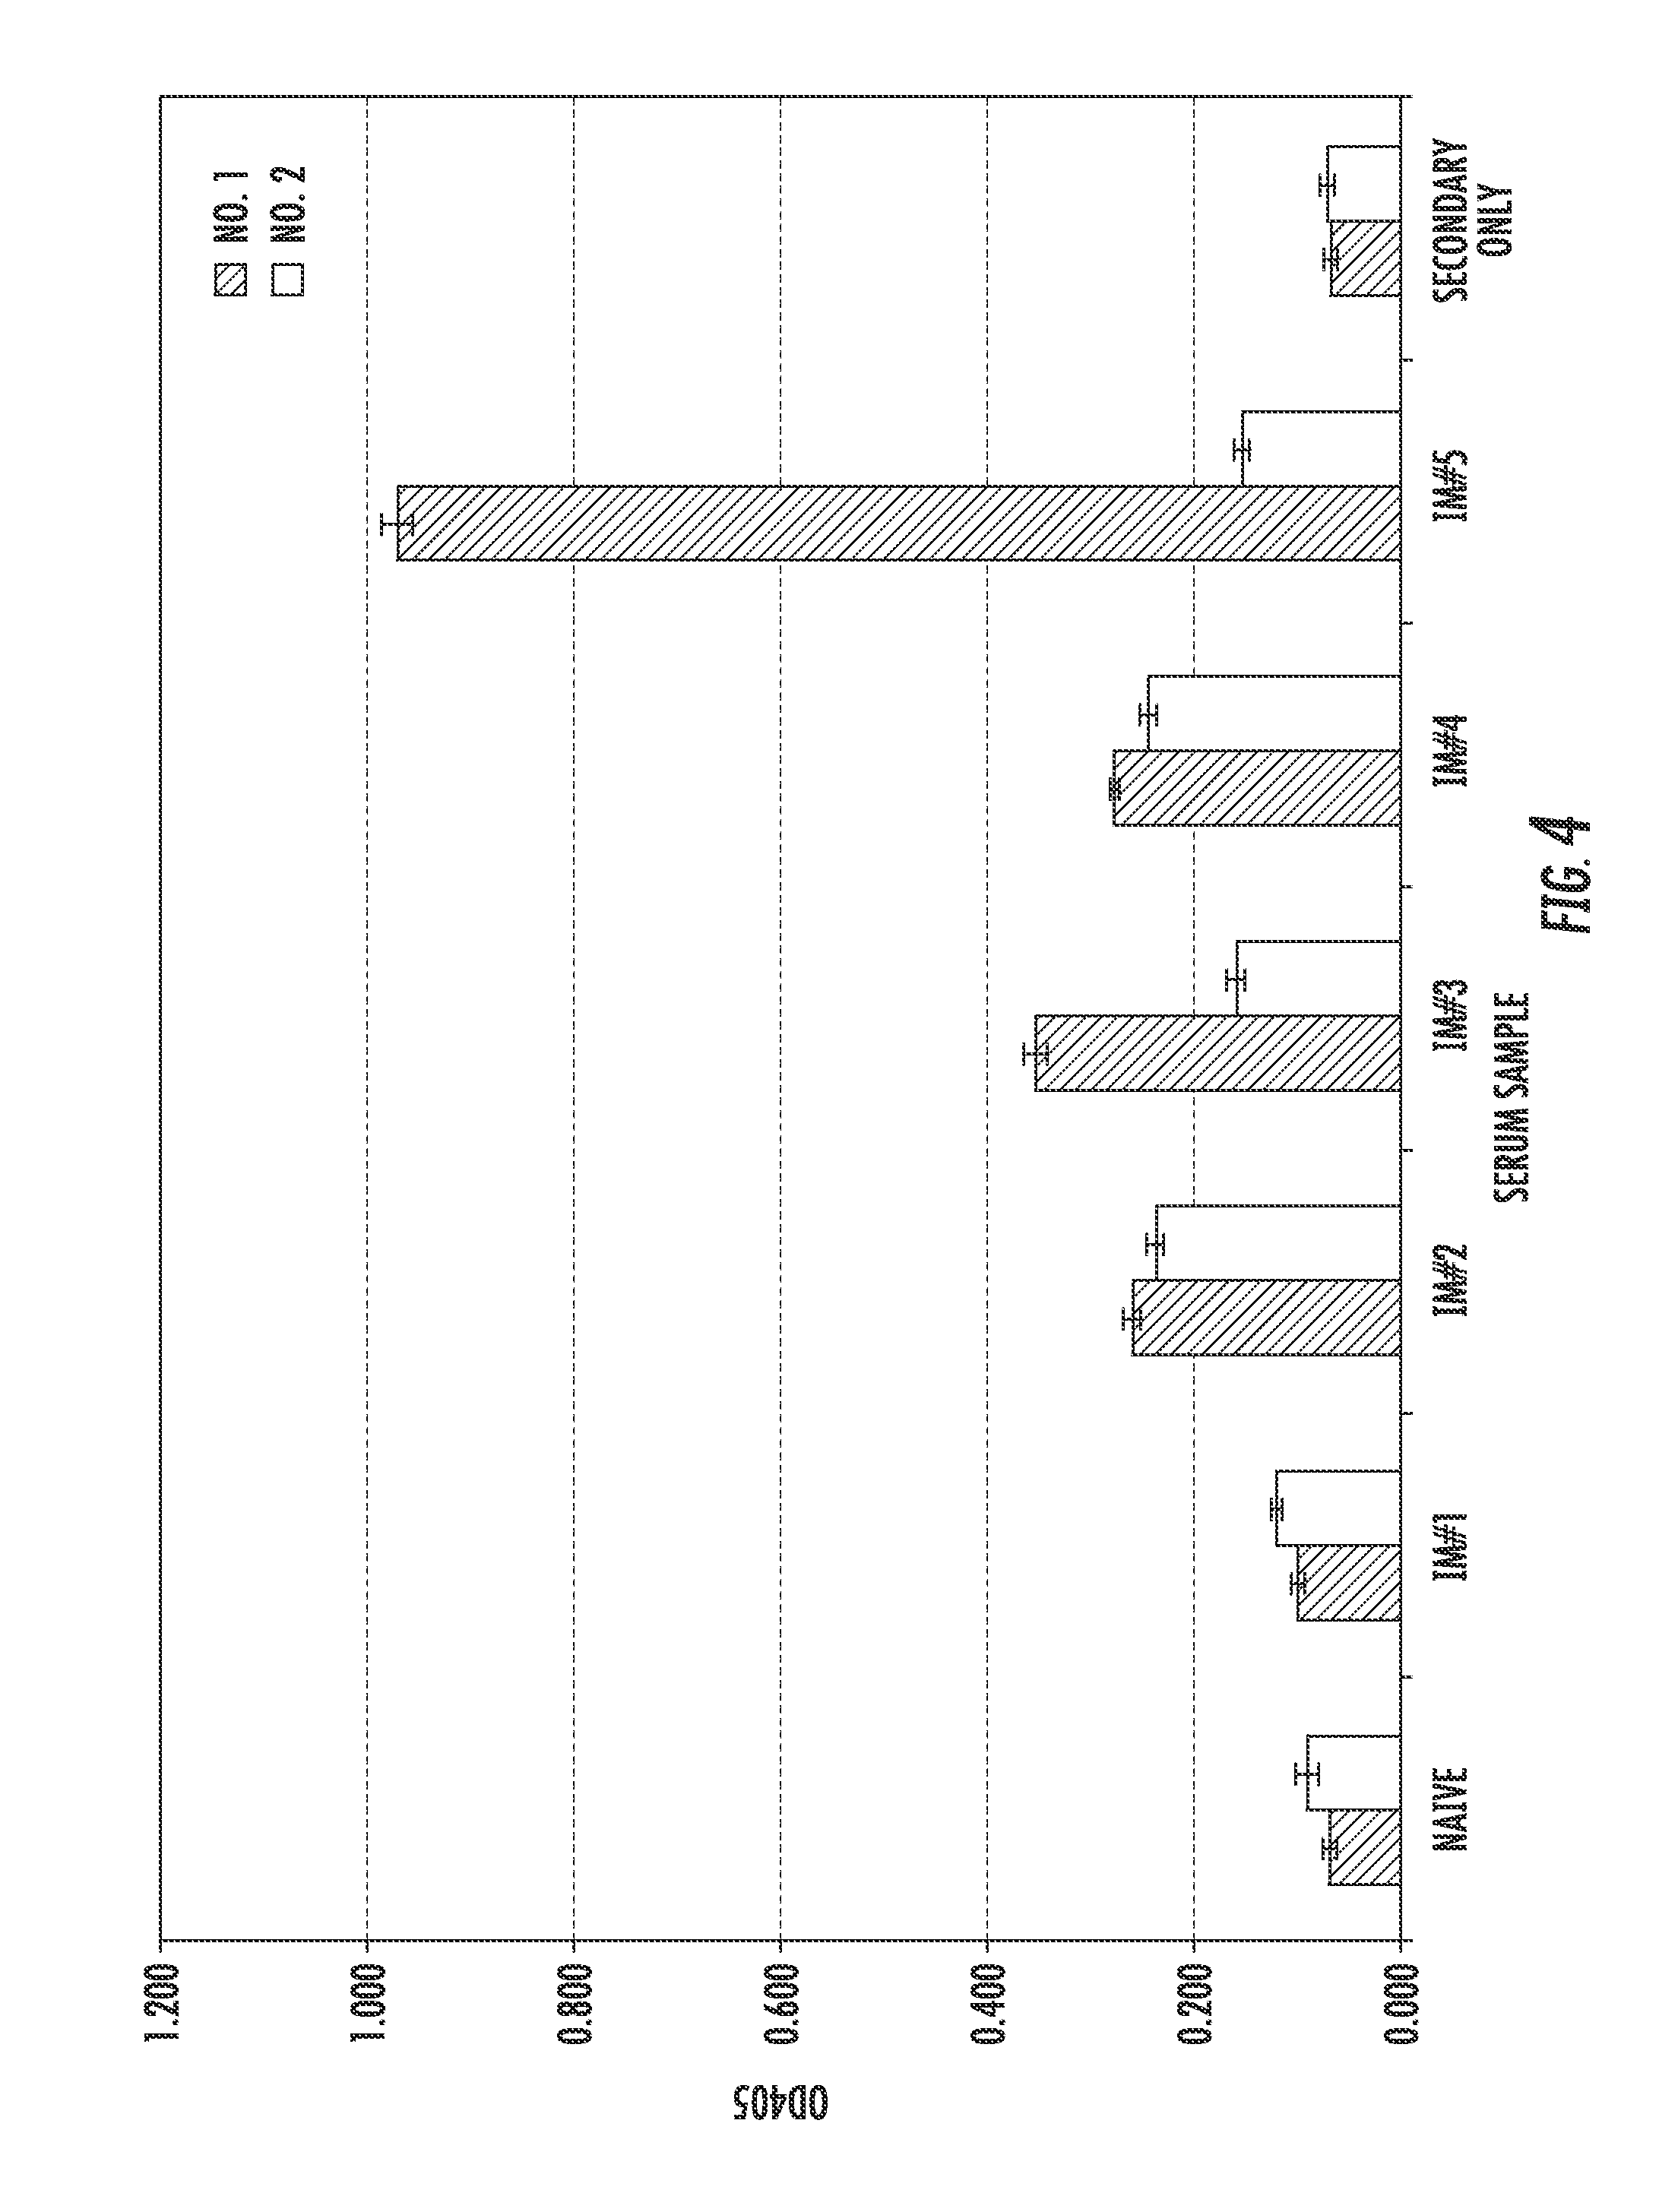 Antimicrobial compositions comprising single domain antibodies and pseudomonas exotoxin